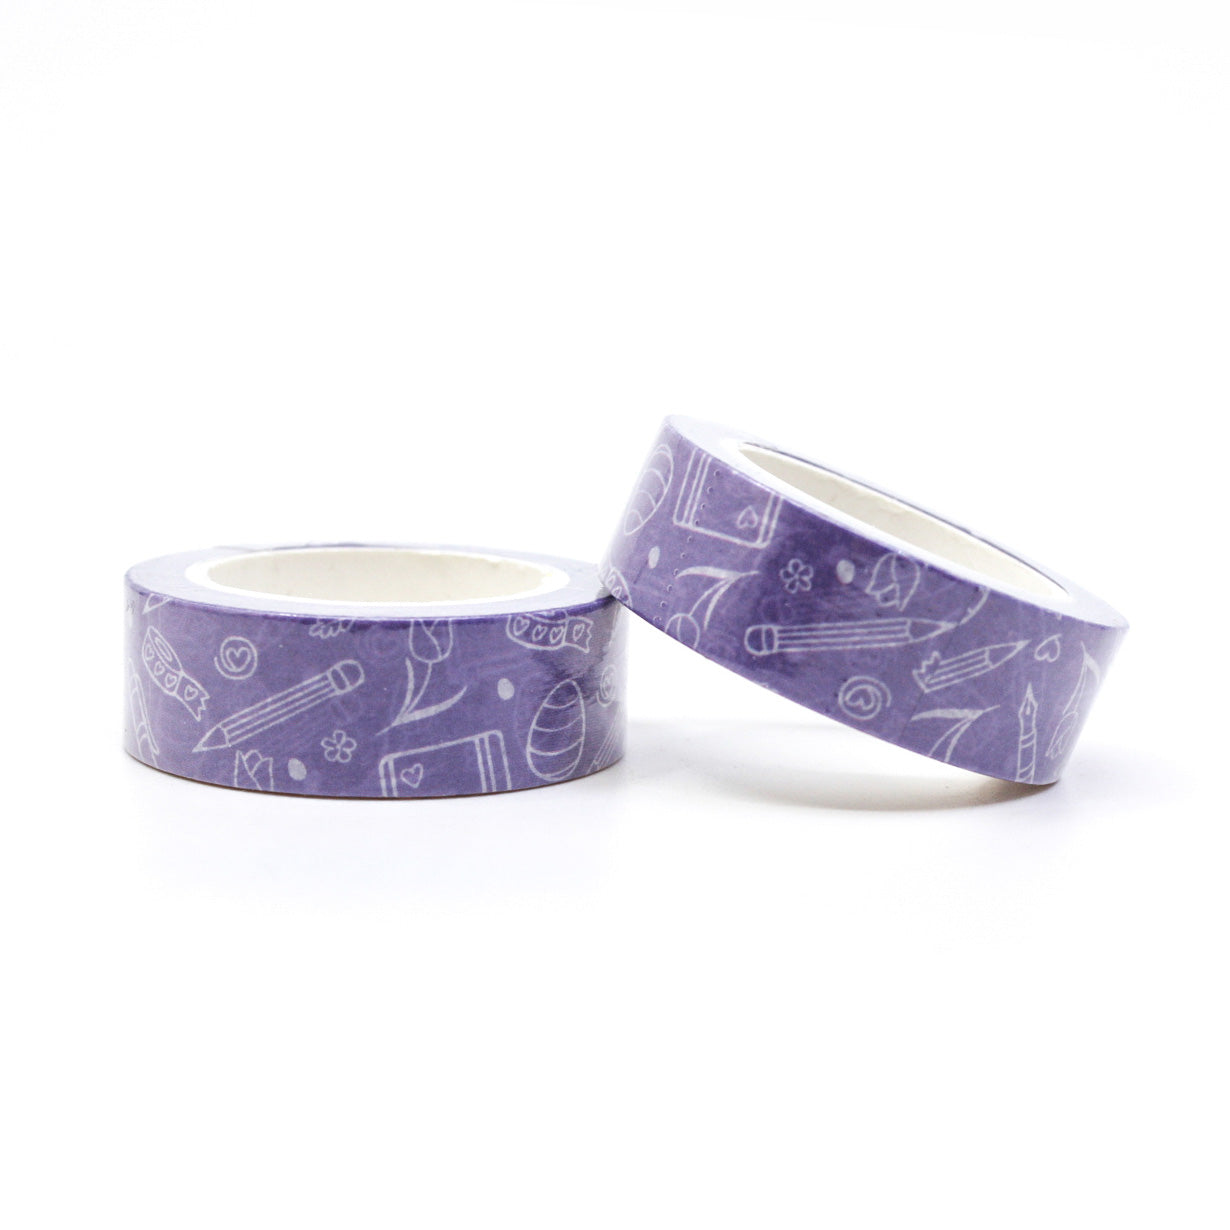  Purple Spring Planner Objects Washi Tape: This washi tape features various spring-themed planner objects in shades of purple, perfect for adding a touch of spring to your planner or journal. This tape is sold at BBB Supplies Craft Shop.